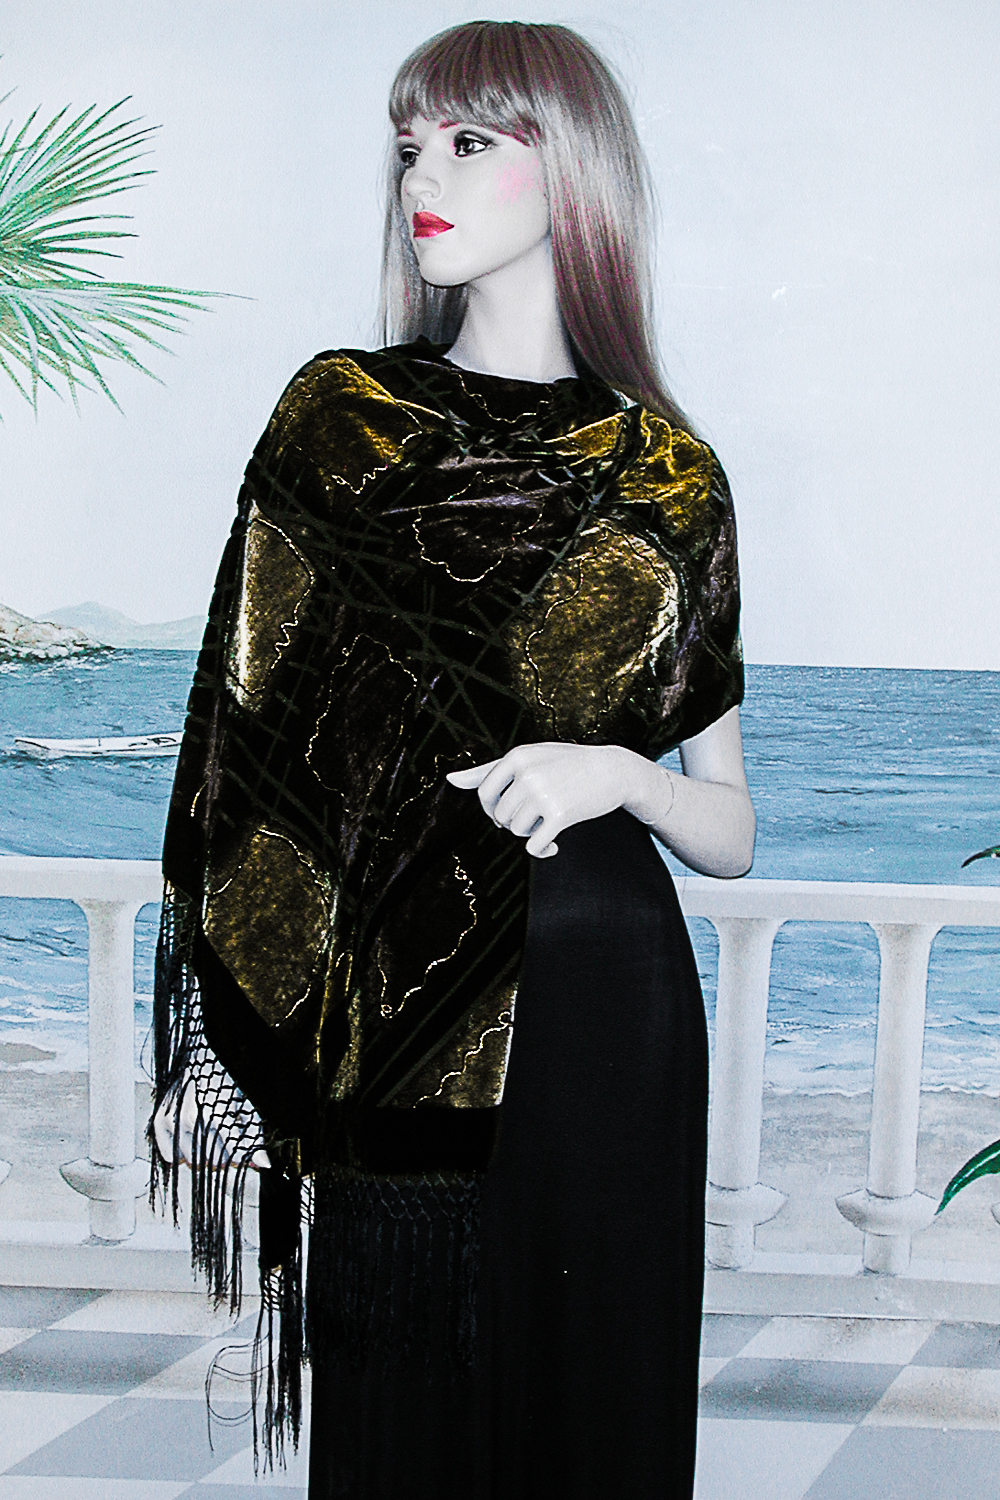 Large Velvet Shawl in Brown Tones with Abstract Design, a fashion accessorie - Evening Elegance